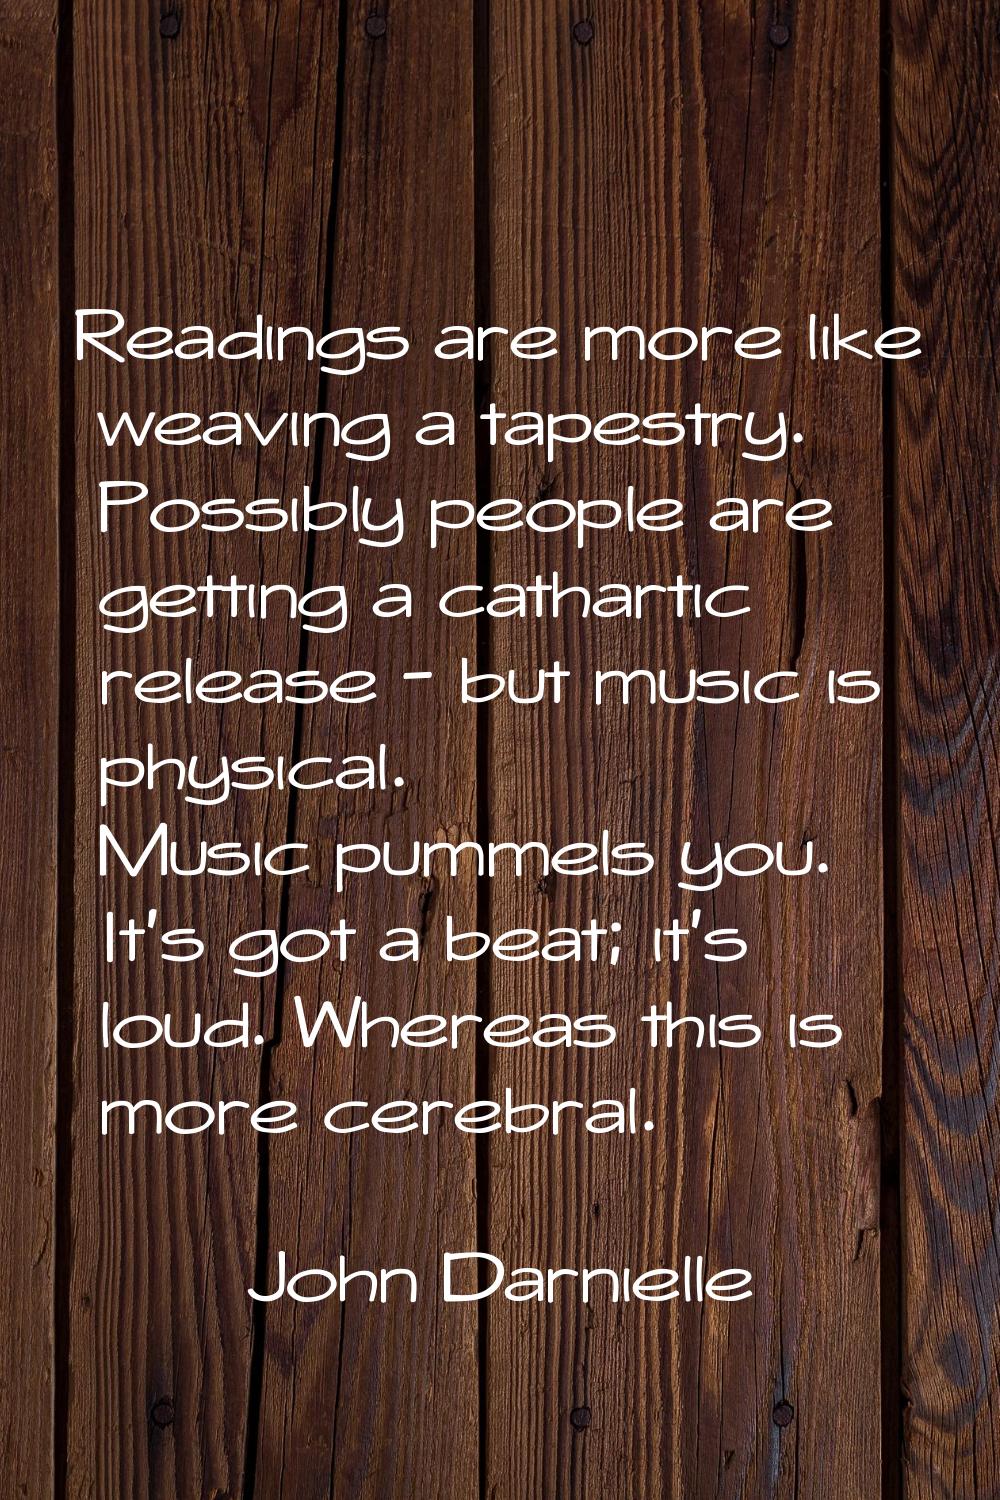 Readings are more like weaving a tapestry. Possibly people are getting a cathartic release - but mu